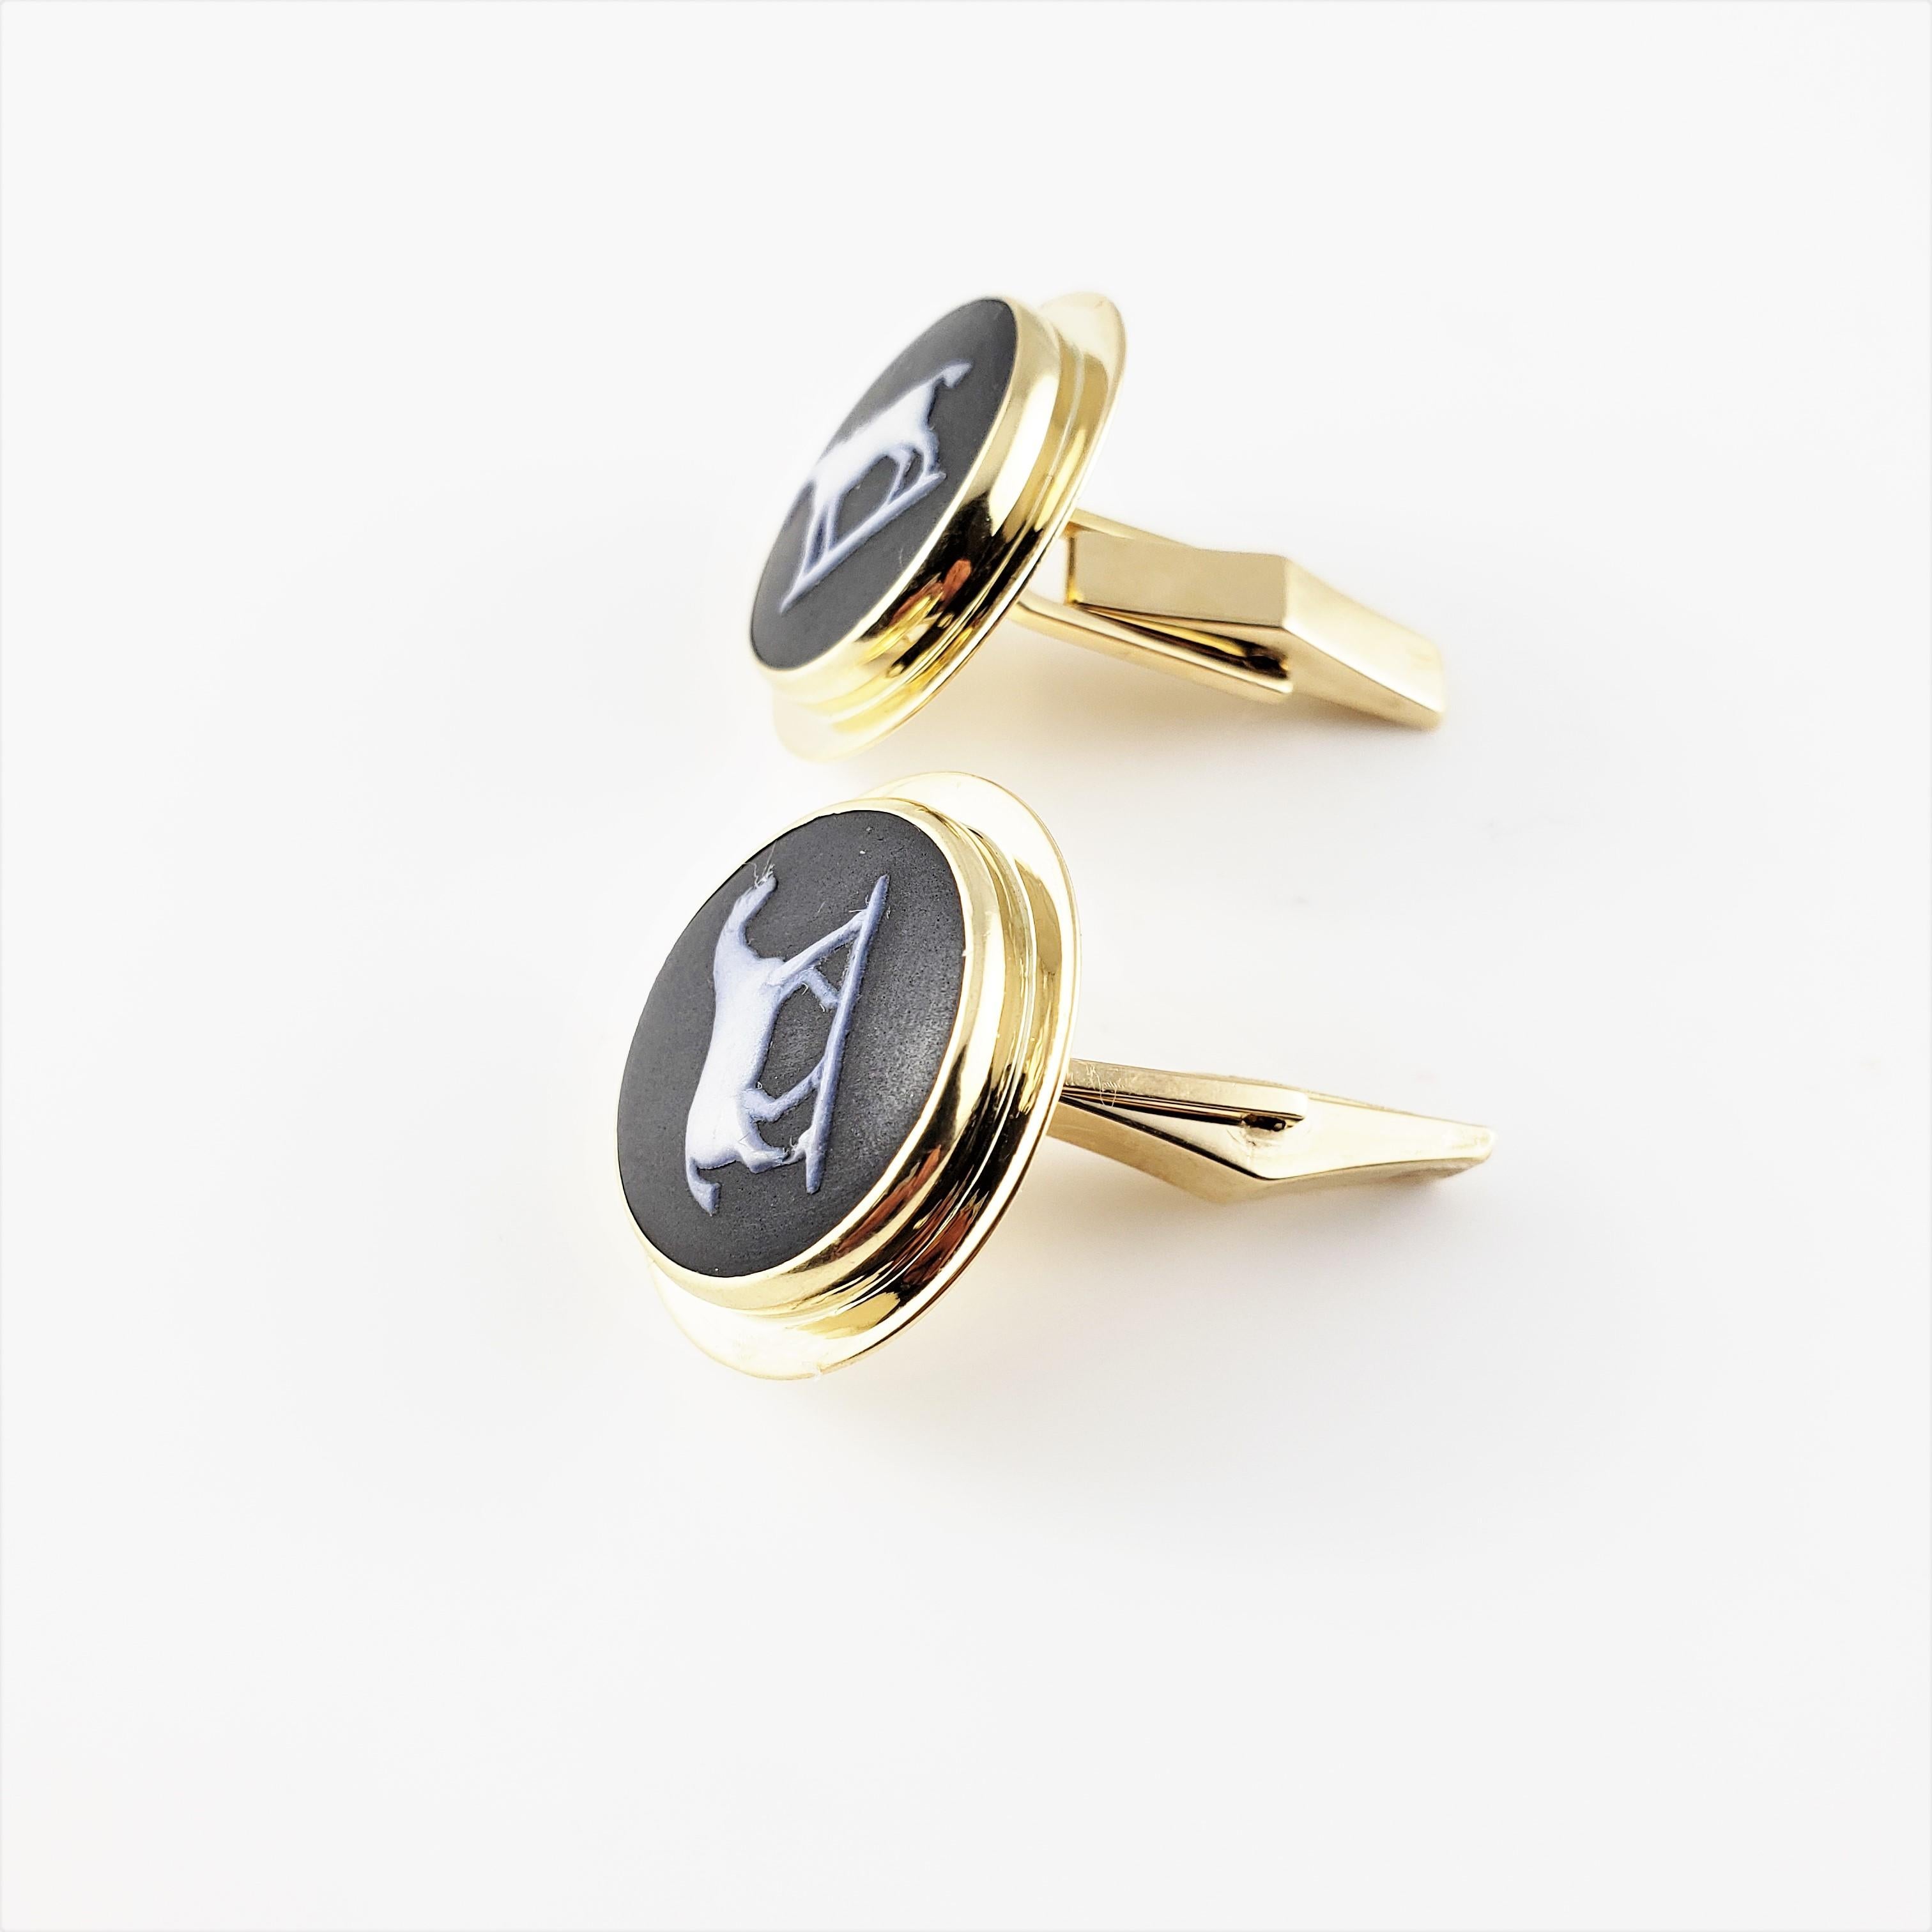 Vintage 14 Karat Yellow Gold and Black Jasperware Horse Cufflinks-

These classic cufflinks feature an elegant horse crafted in black and white jasperware and set in 14K yellow gold.

Size: 24 mm

Weight: 8.4 dwt. / 13.2 gr.

Stamped: 14K